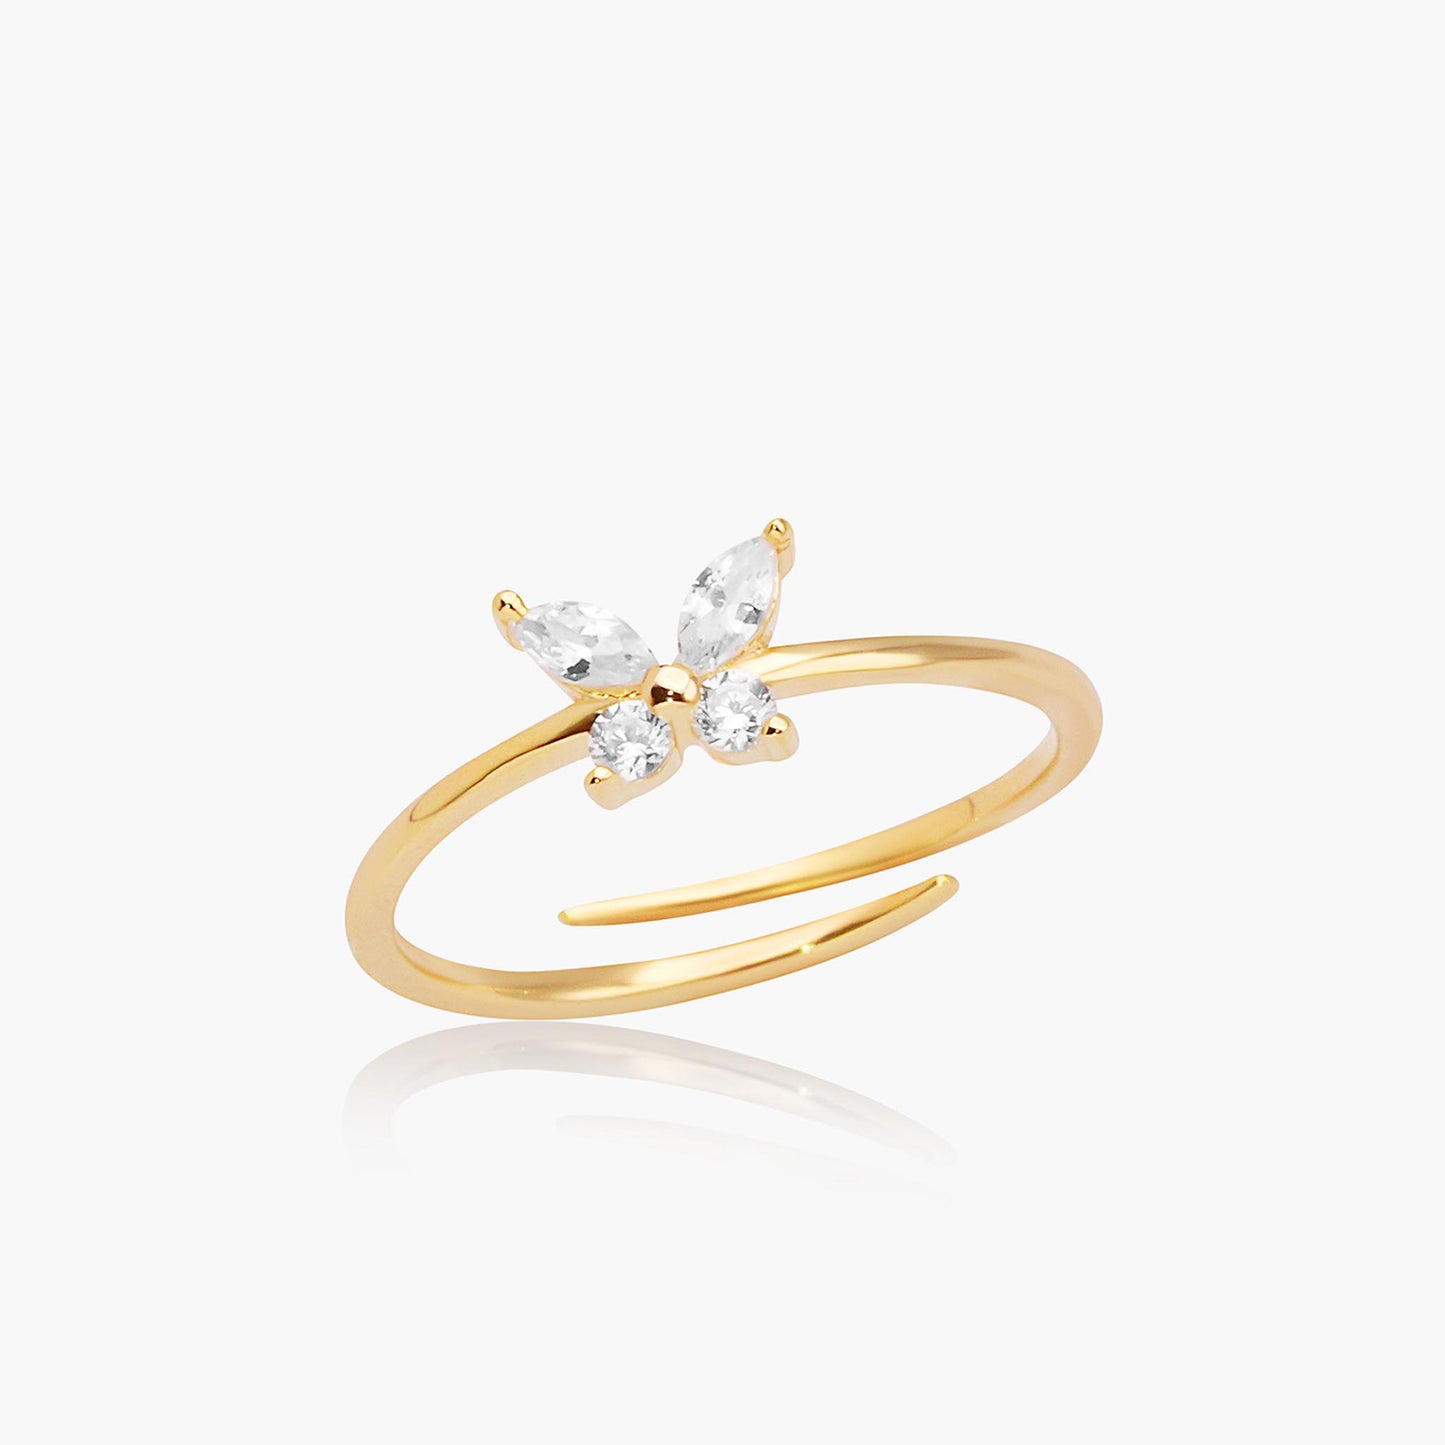 14K YELLOW GOLD FILIGREE BUTTERFLY RING | Patty Q's Jewelry Inc